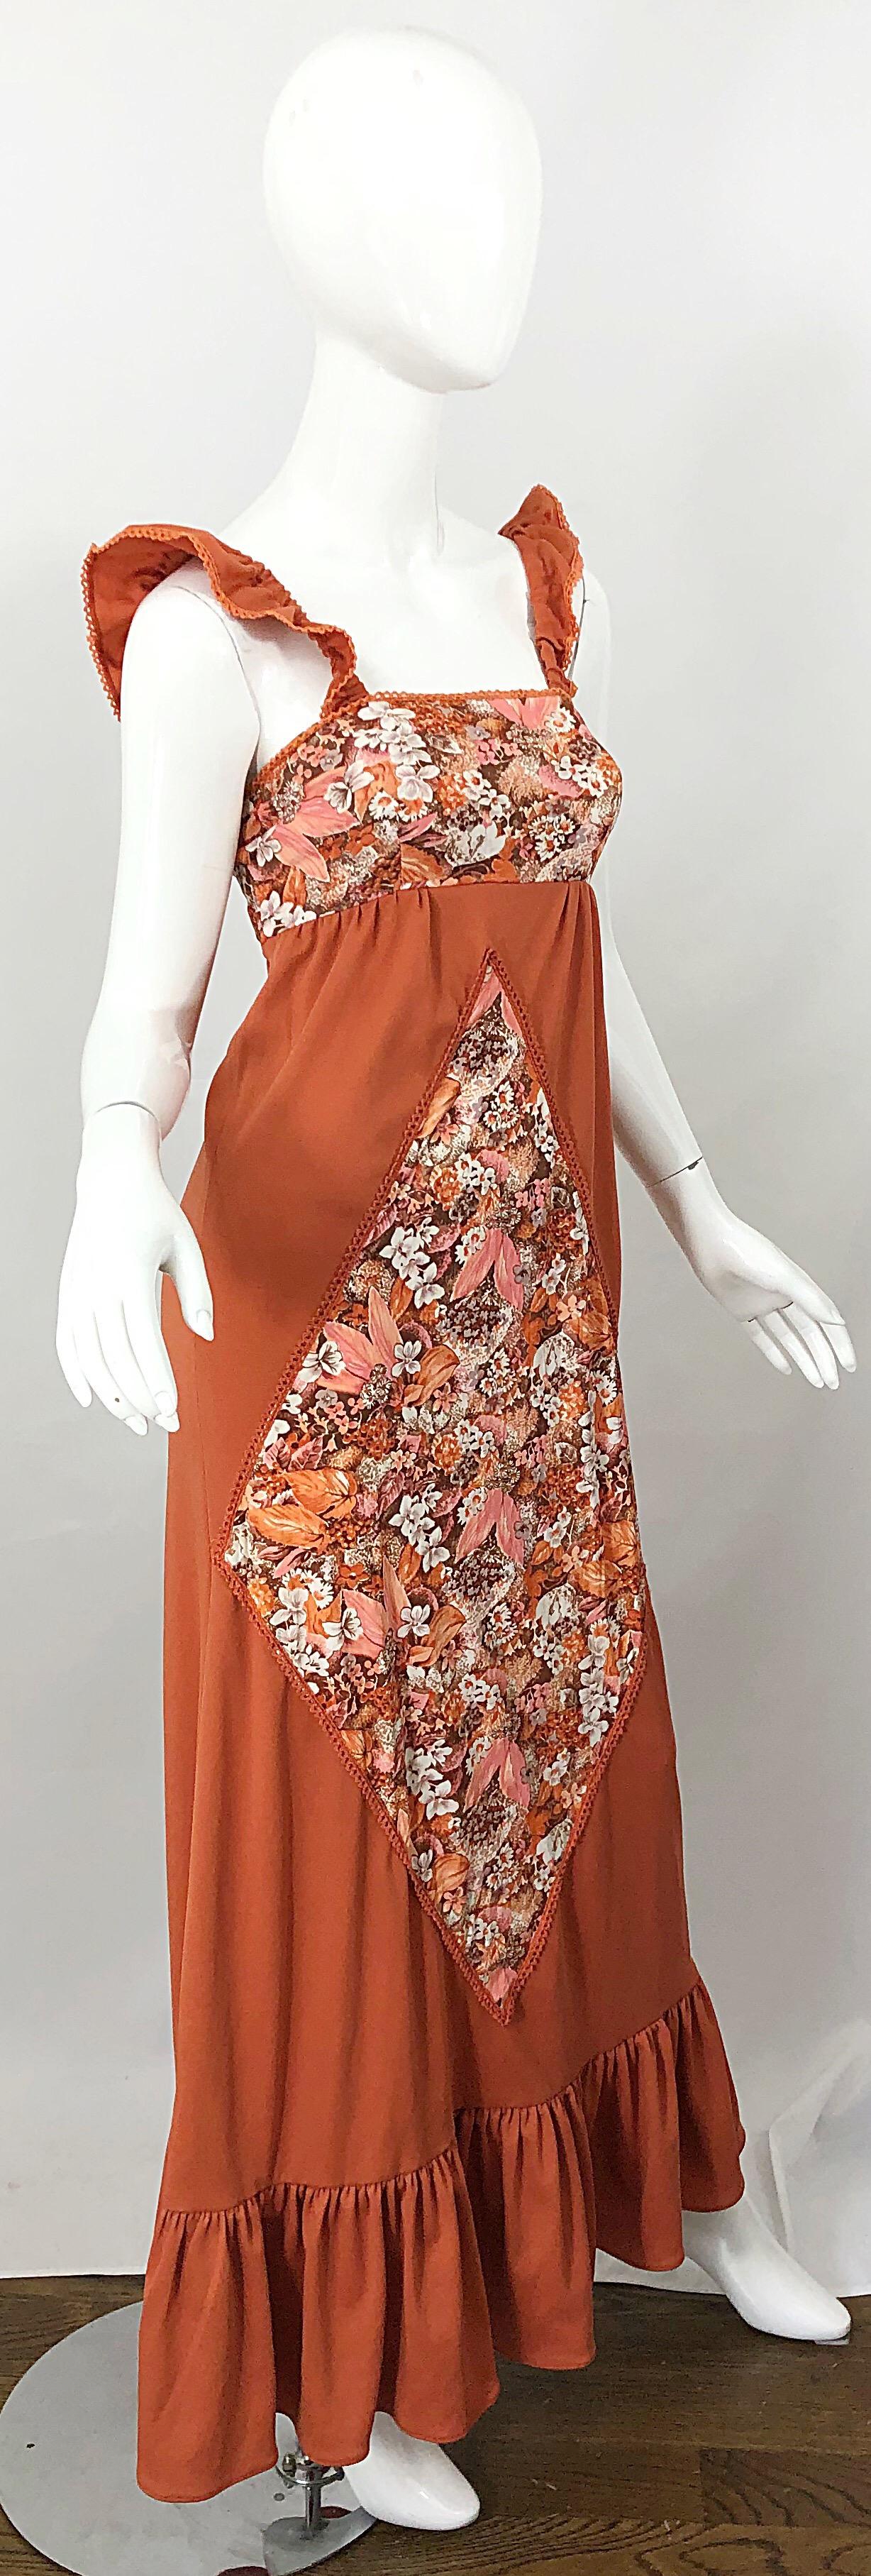 1970s Burnt Orange Patchwork Flowers Boho Vintage 70s Jersey Autumnal Maxi Dress In Excellent Condition For Sale In San Diego, CA